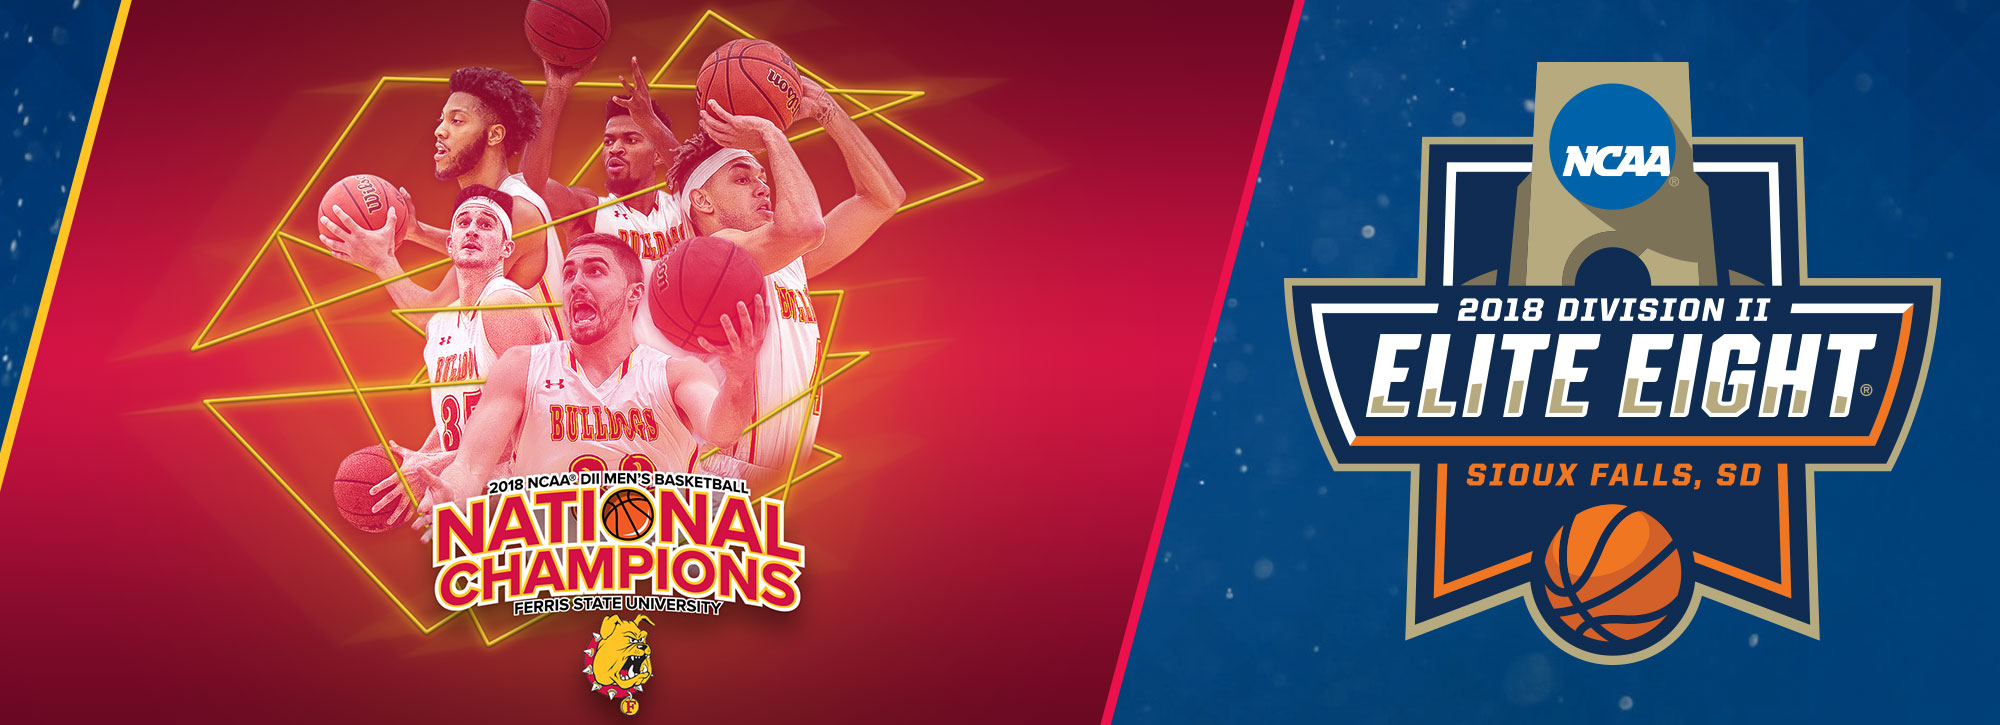 Ferris State Captures 2018 NCAA Division II Men's Basketball National Championship!